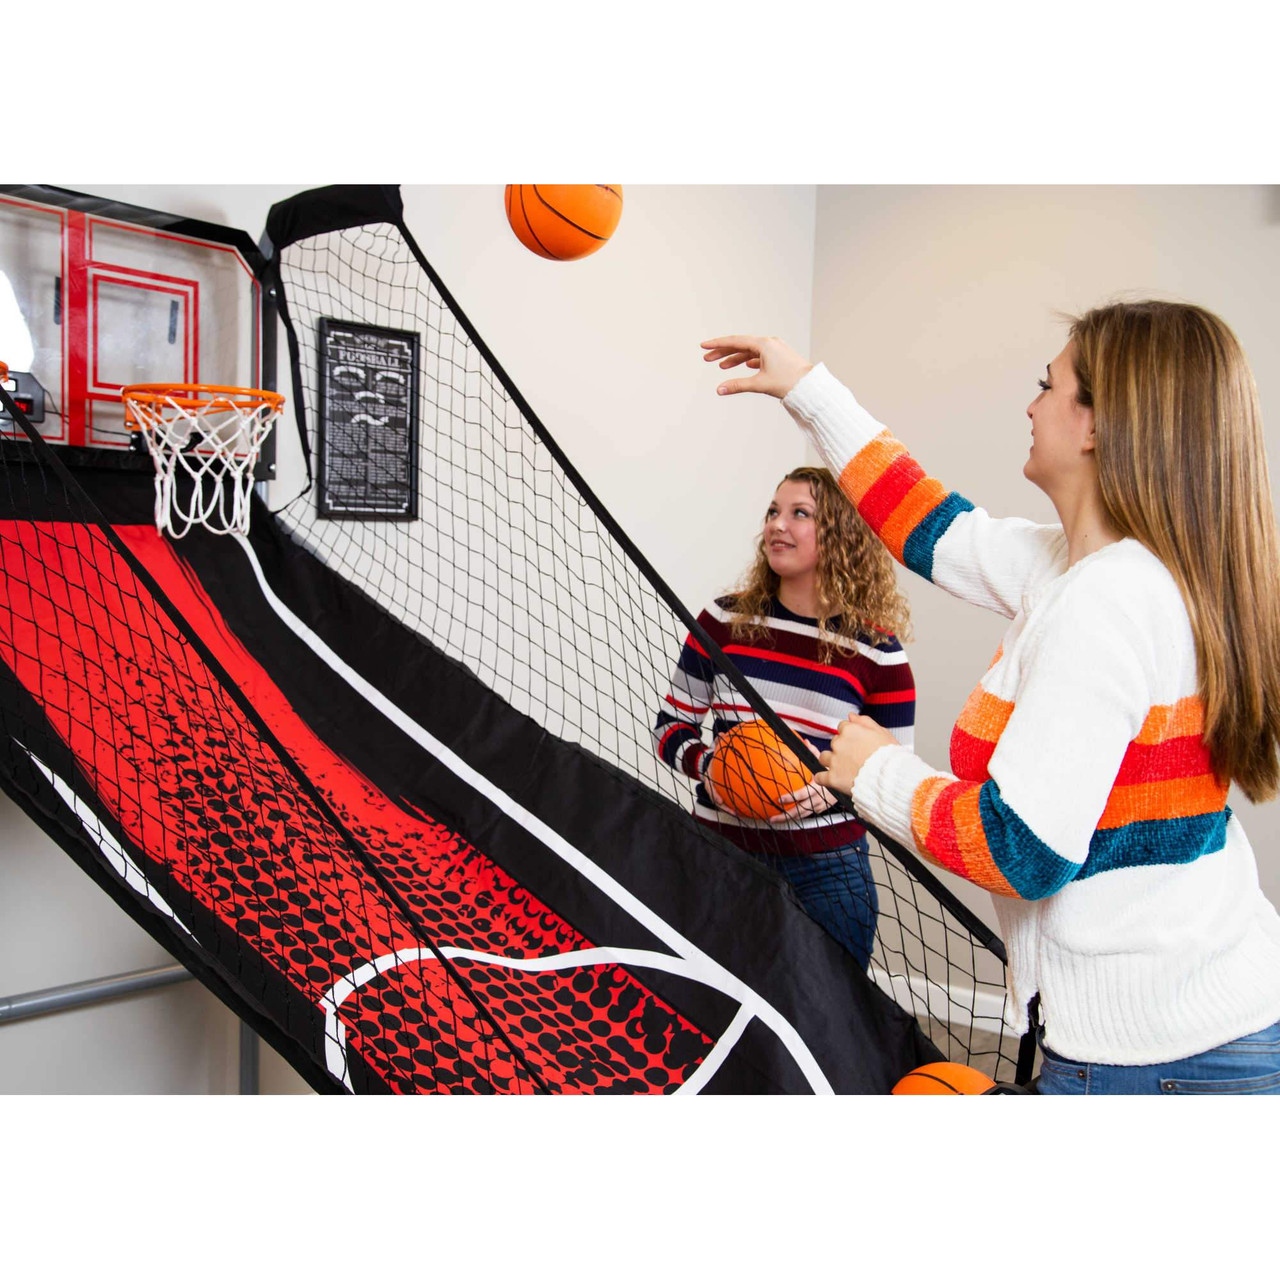 NG2246BL, Blue Wave, Shot Pro Deluxe, Electronic, Pop-a-shot,  Basketball, Game, FREE SHIPPING